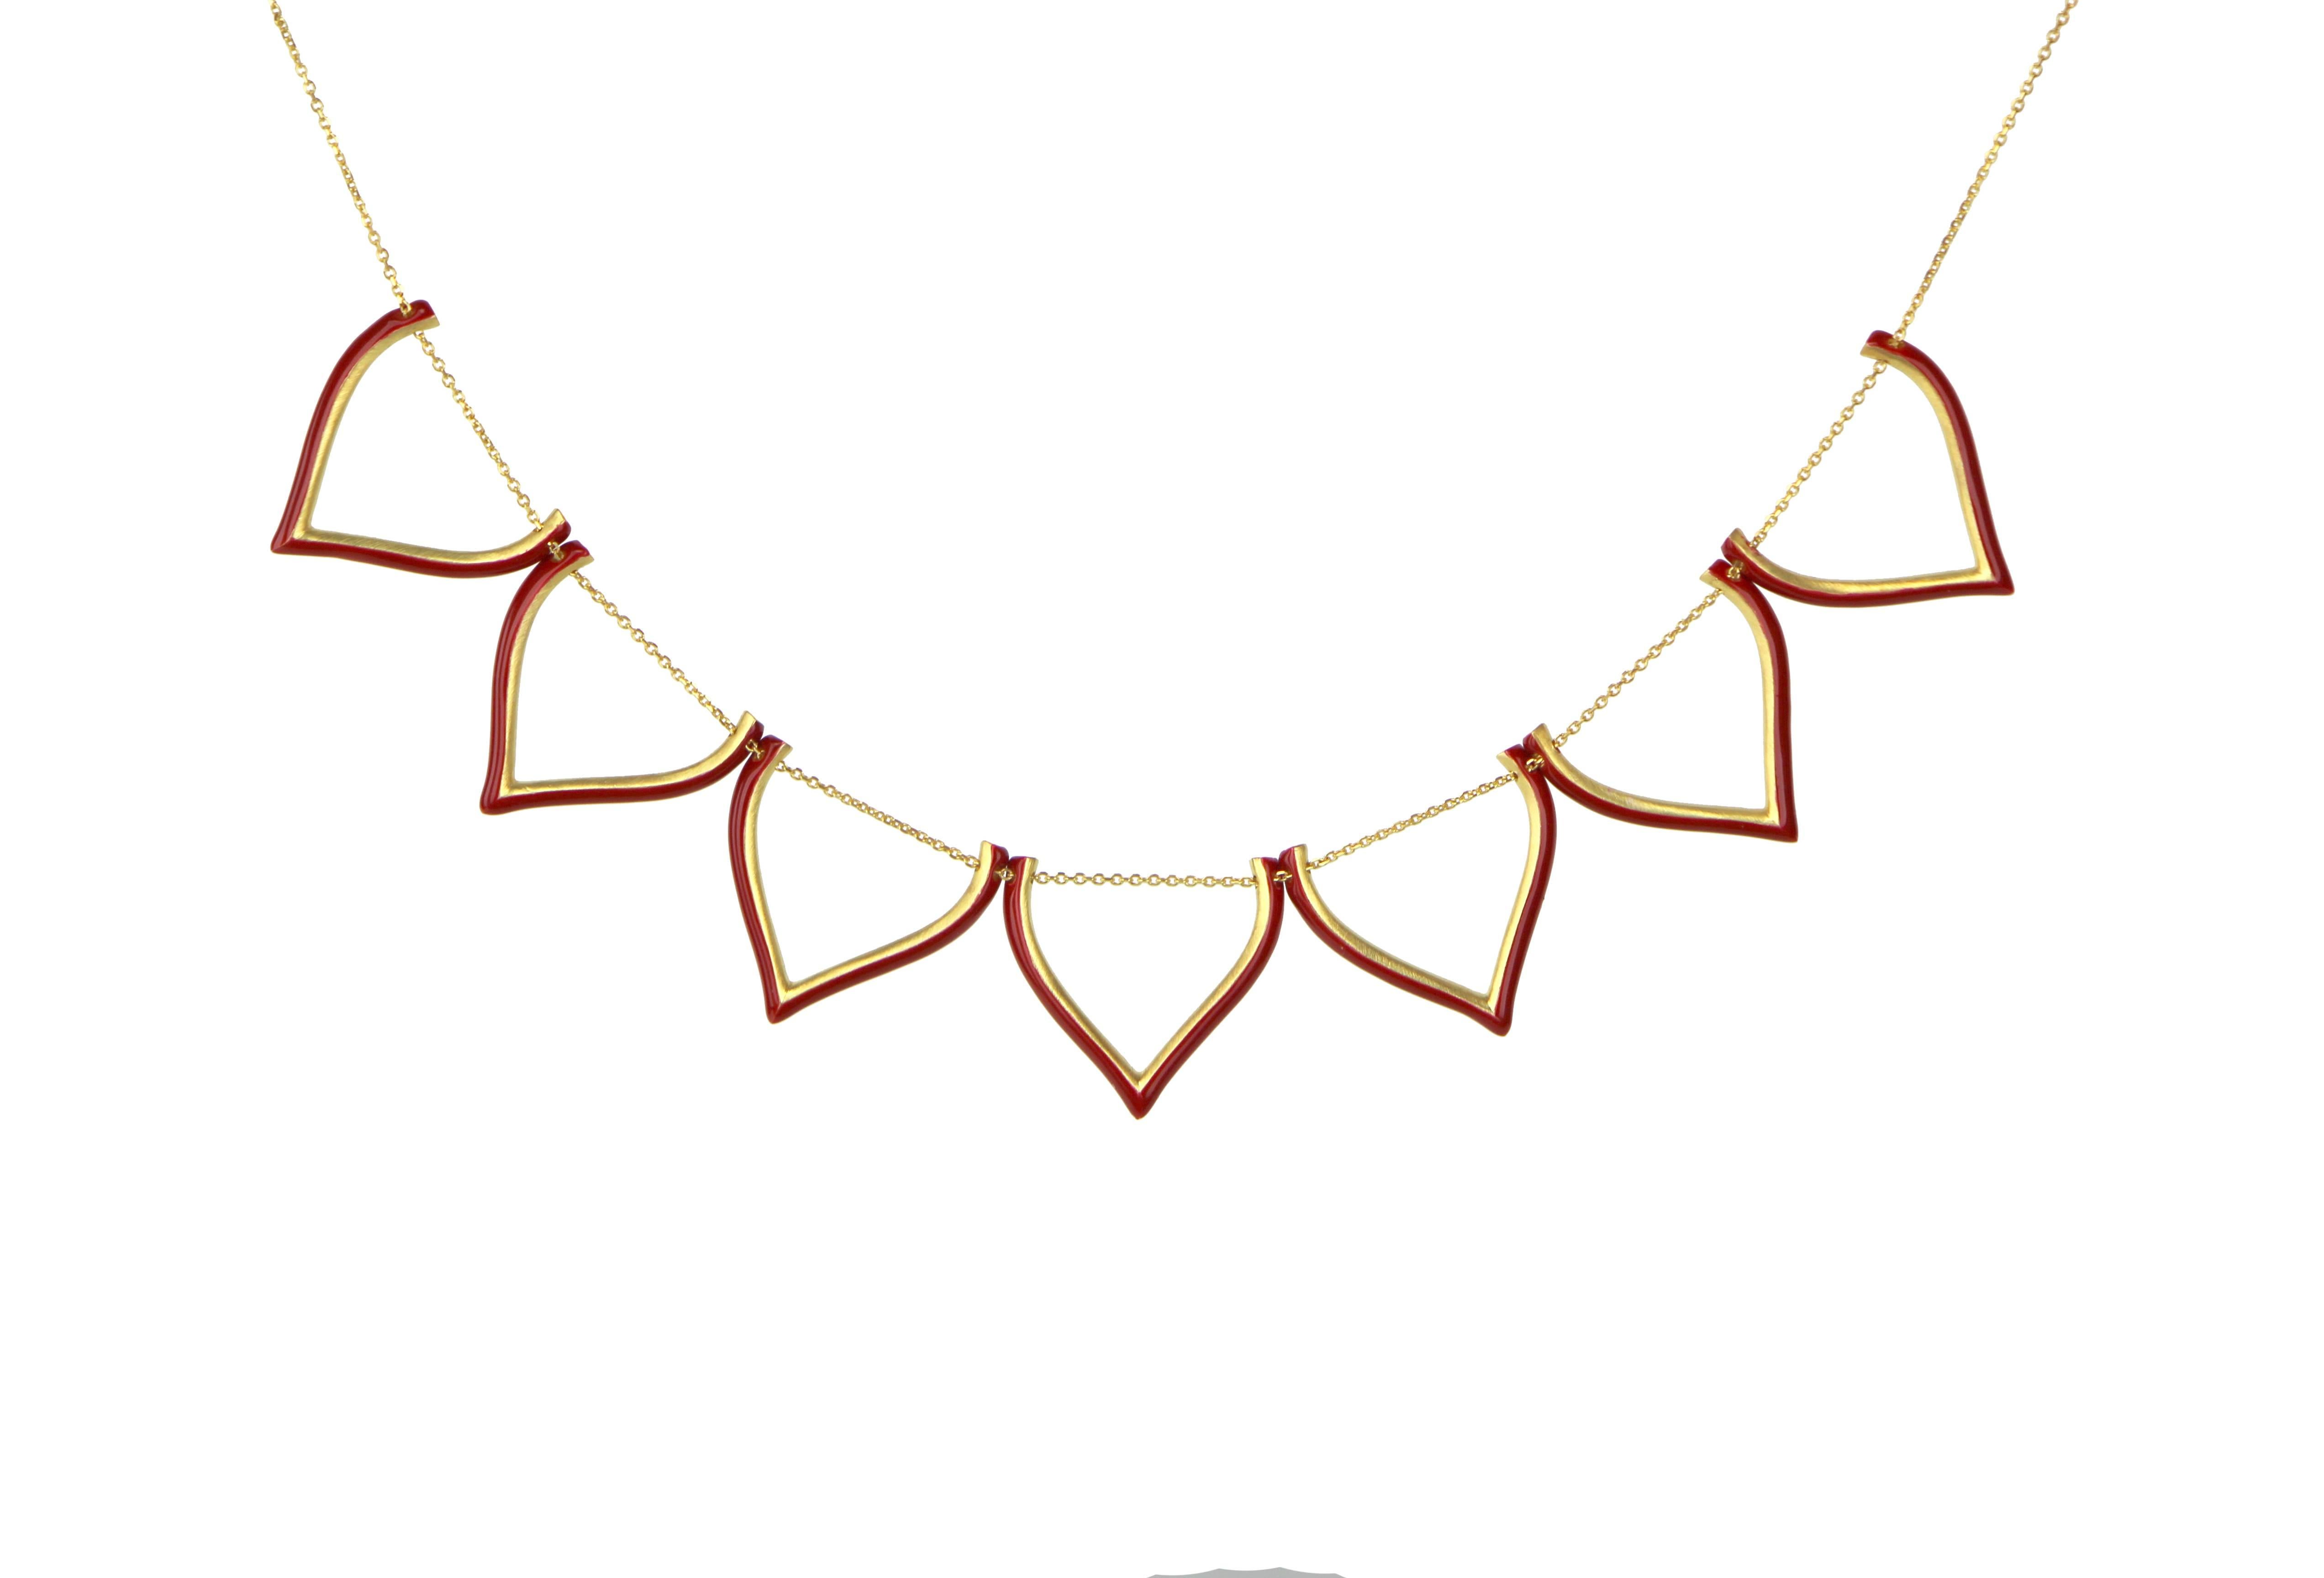  Necklace Classic Lotus Motif  18 K Gold-Plated Silver  Red Enamel Lotus Greek  For Sale 2